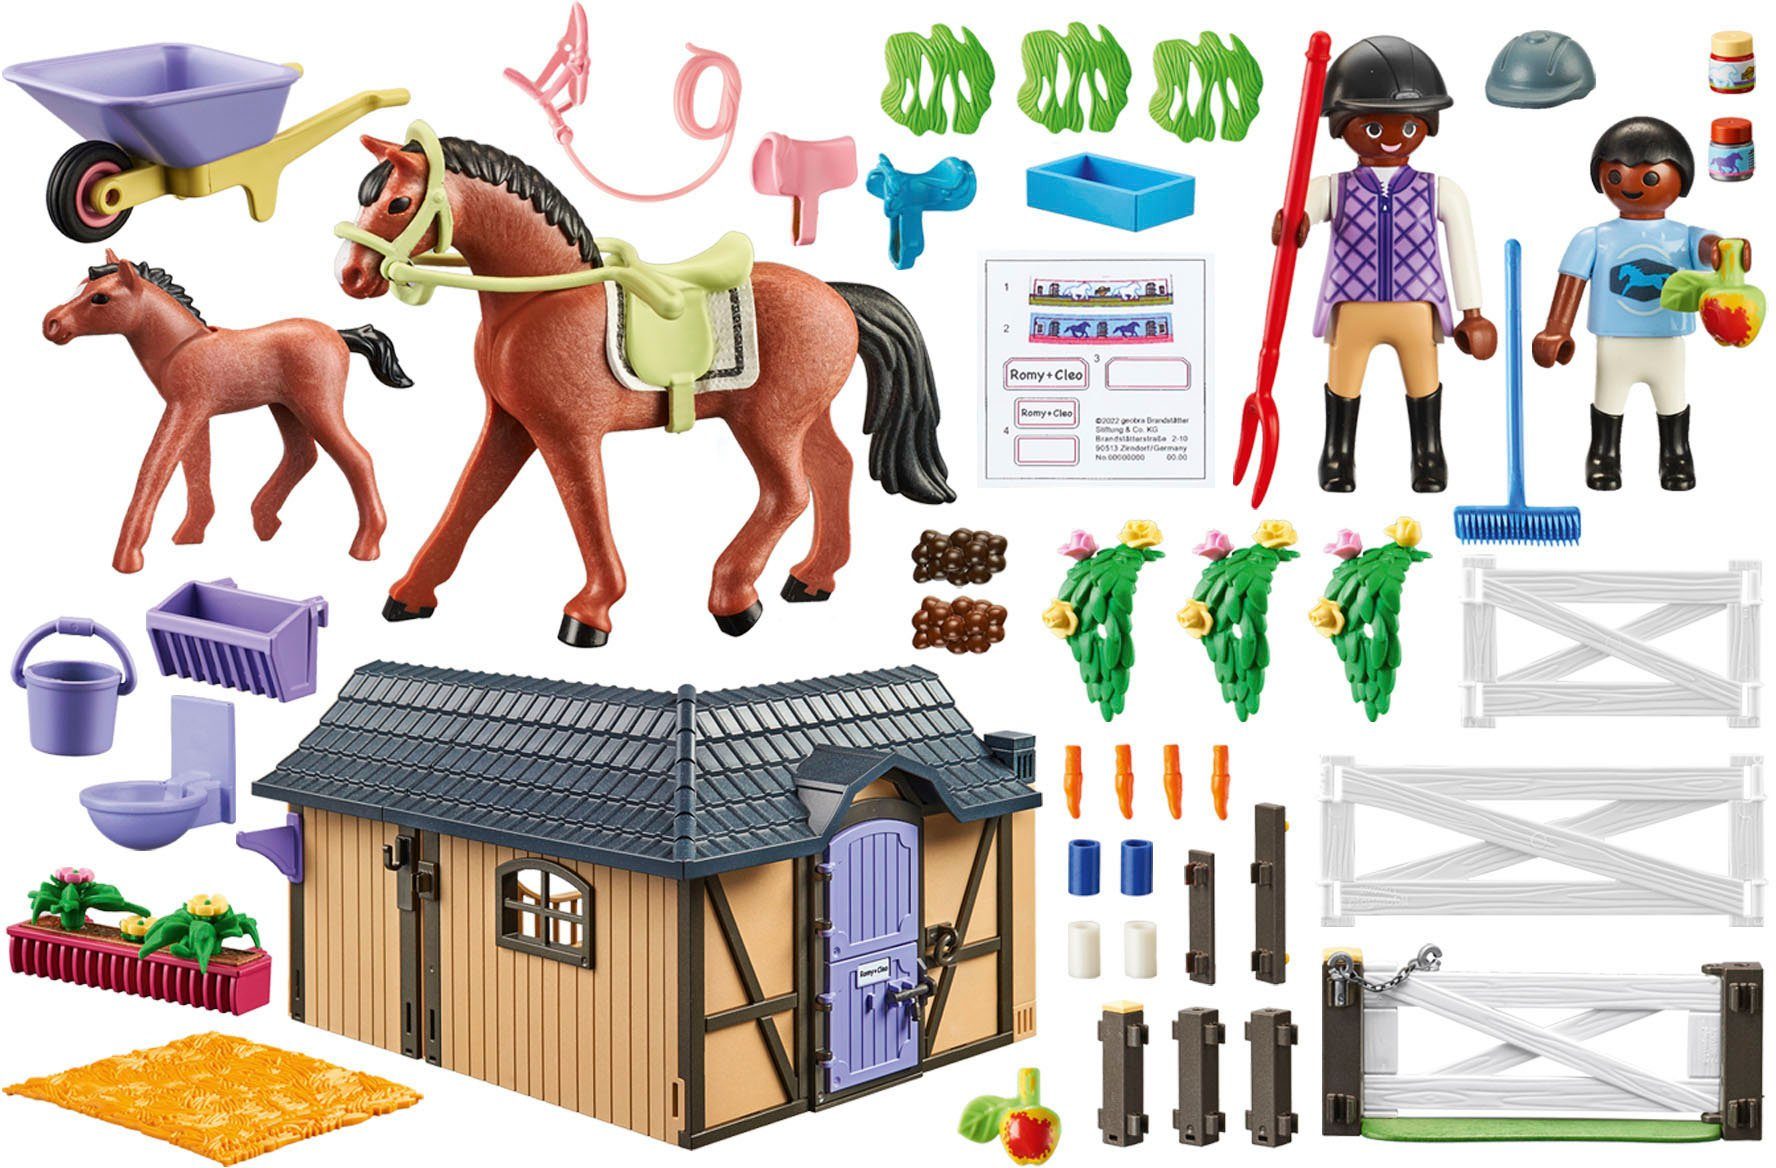 Playmobil® Konstruktions-Spielset Reitstall Made (136 Country, Germany St), (71238), in